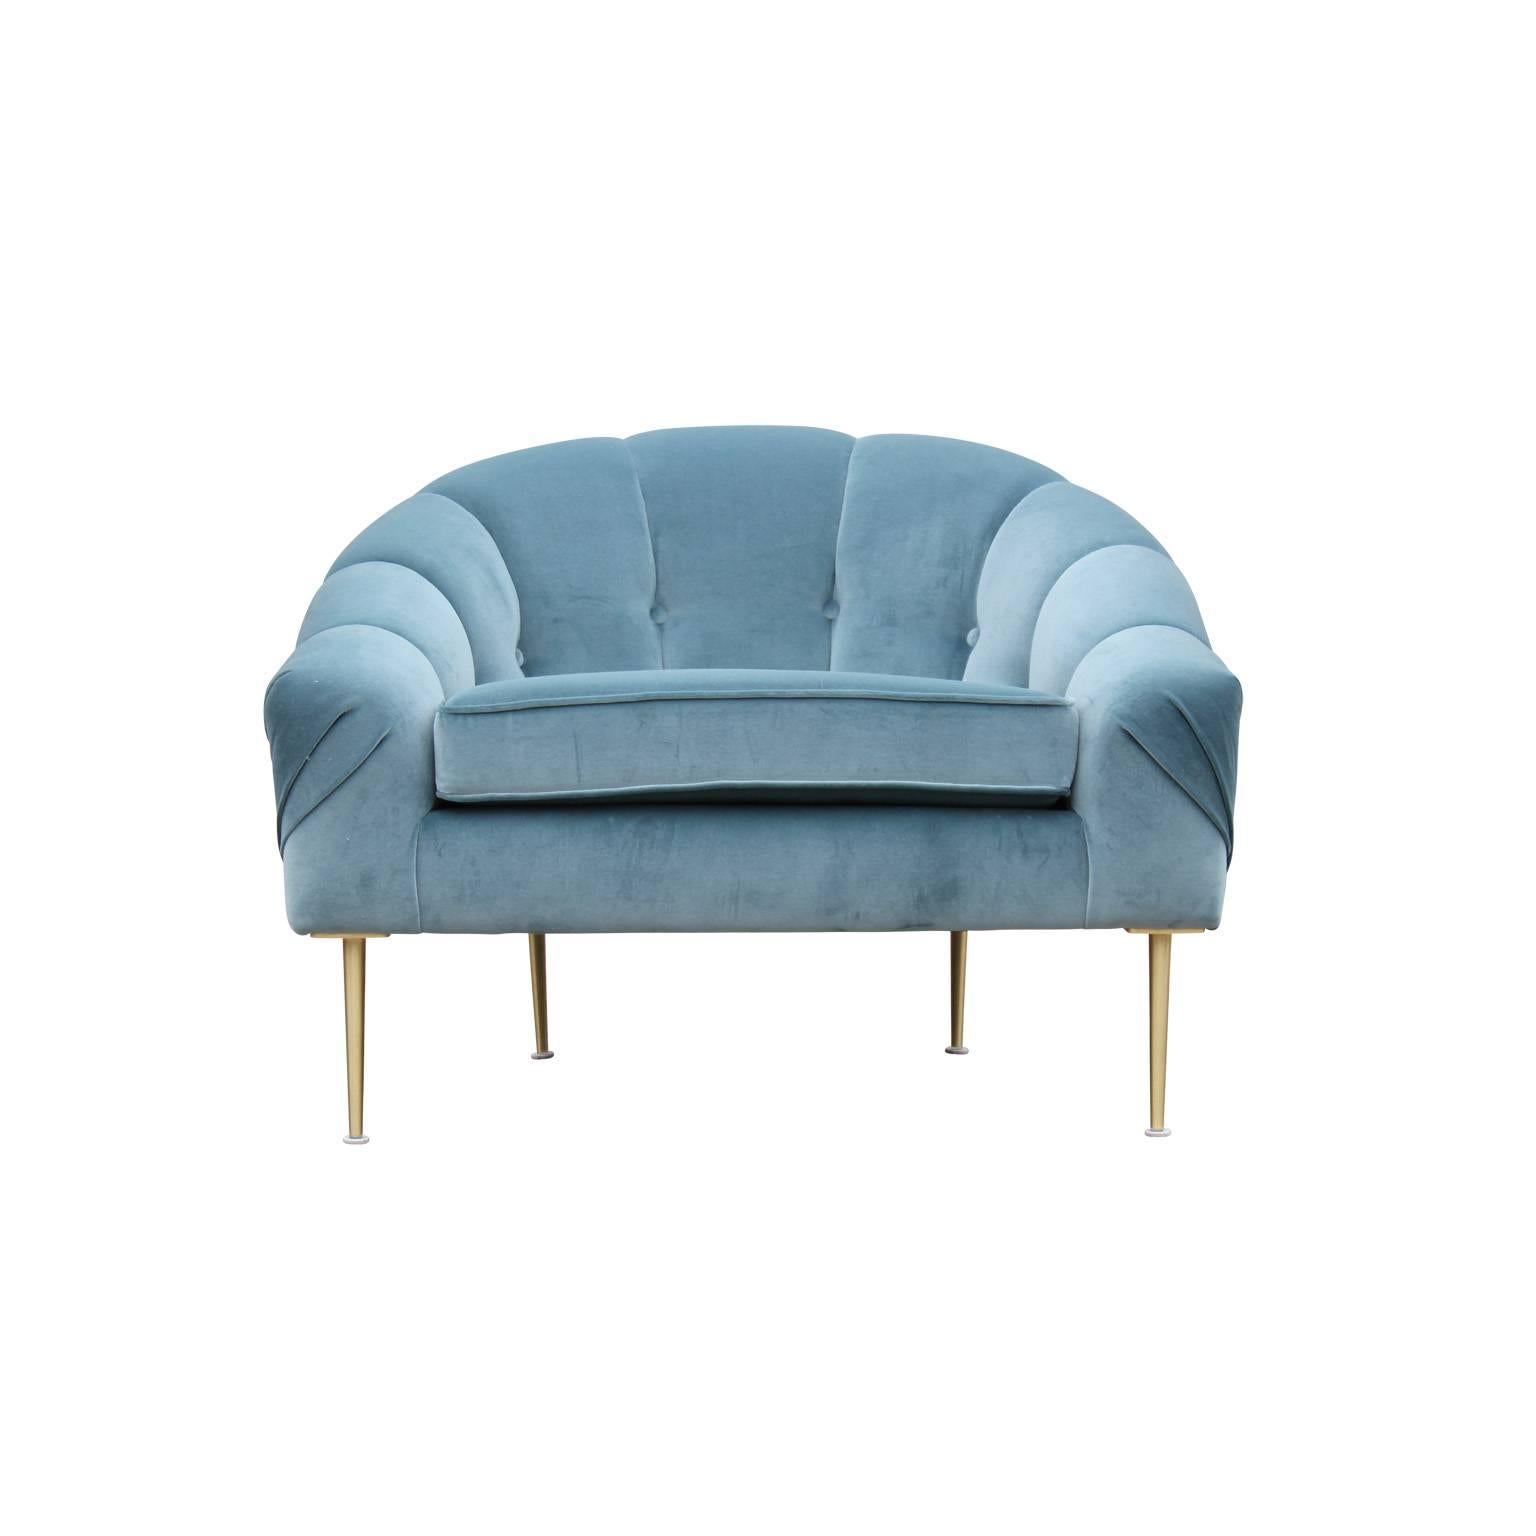 Pair of gorgeous custom made blue velvet lounge chairs with tapered brass legs. In the style of Ward Bennett or Milo Baughman. Freshly upholstered in a cool blue velvet. The perfect chair.